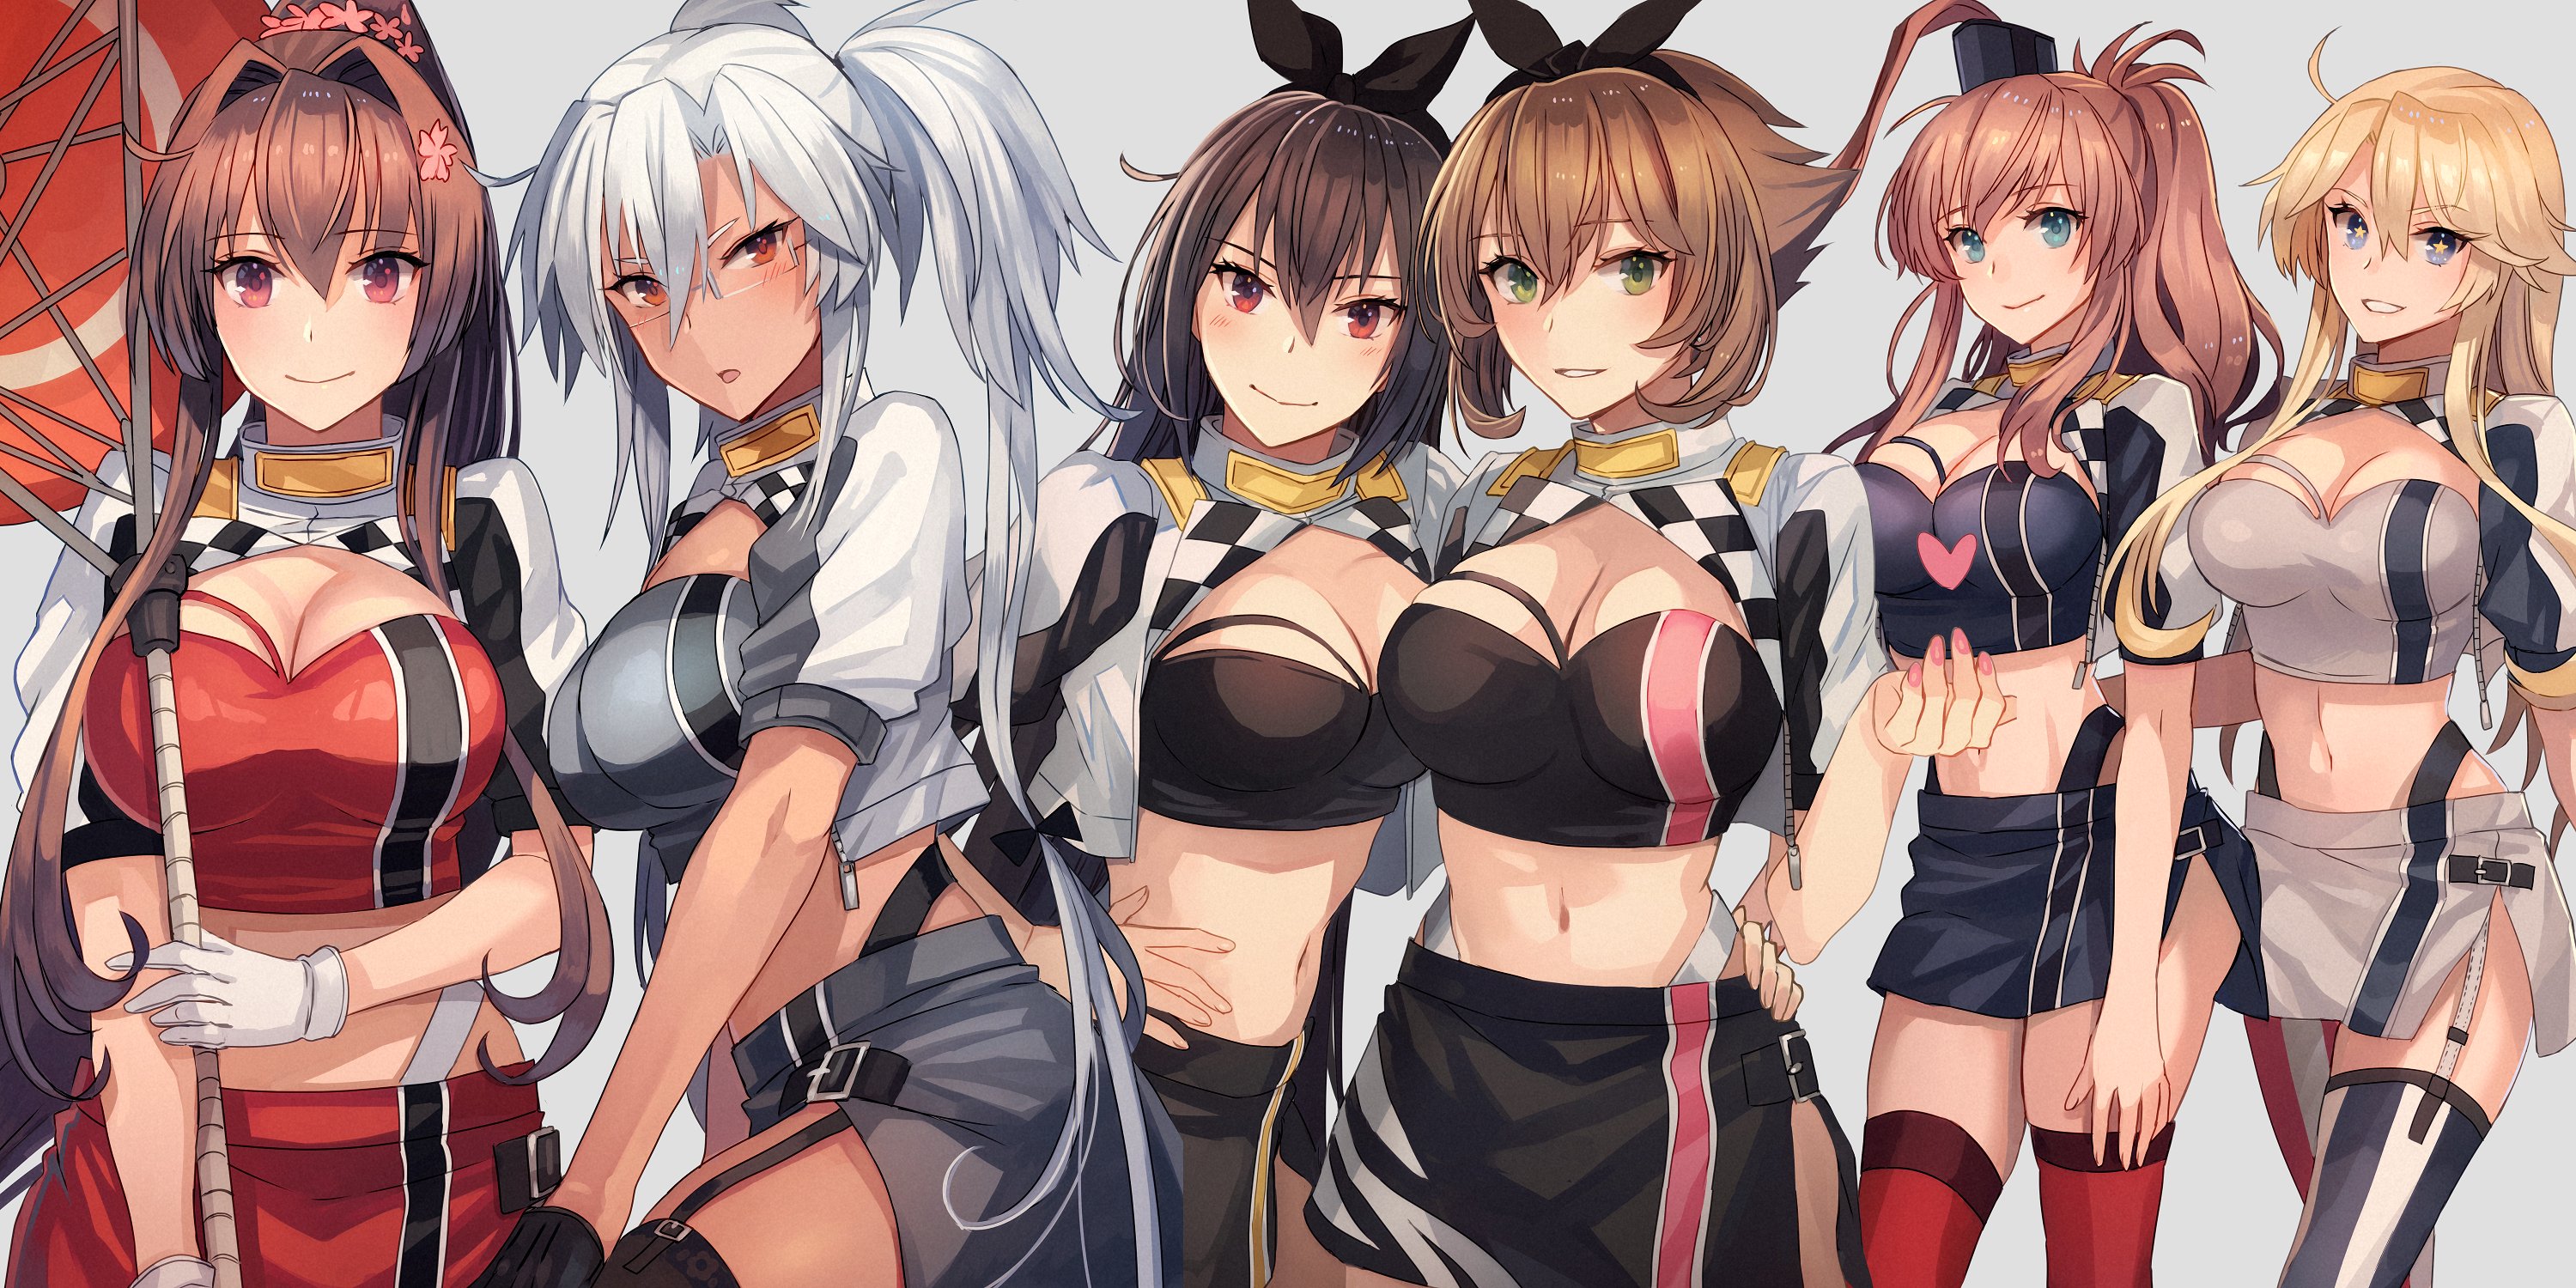 Anime 3000x1500 anime anime girls cleavage big boobs Race Queen Outfit artwork skchkko Kantai Collection Iowa (KanColle) Musashi (KanColle) Mutsu (KanColle) Nagato (KanColle) Saratoga (KanColle) Yamato (KanColle) group of women